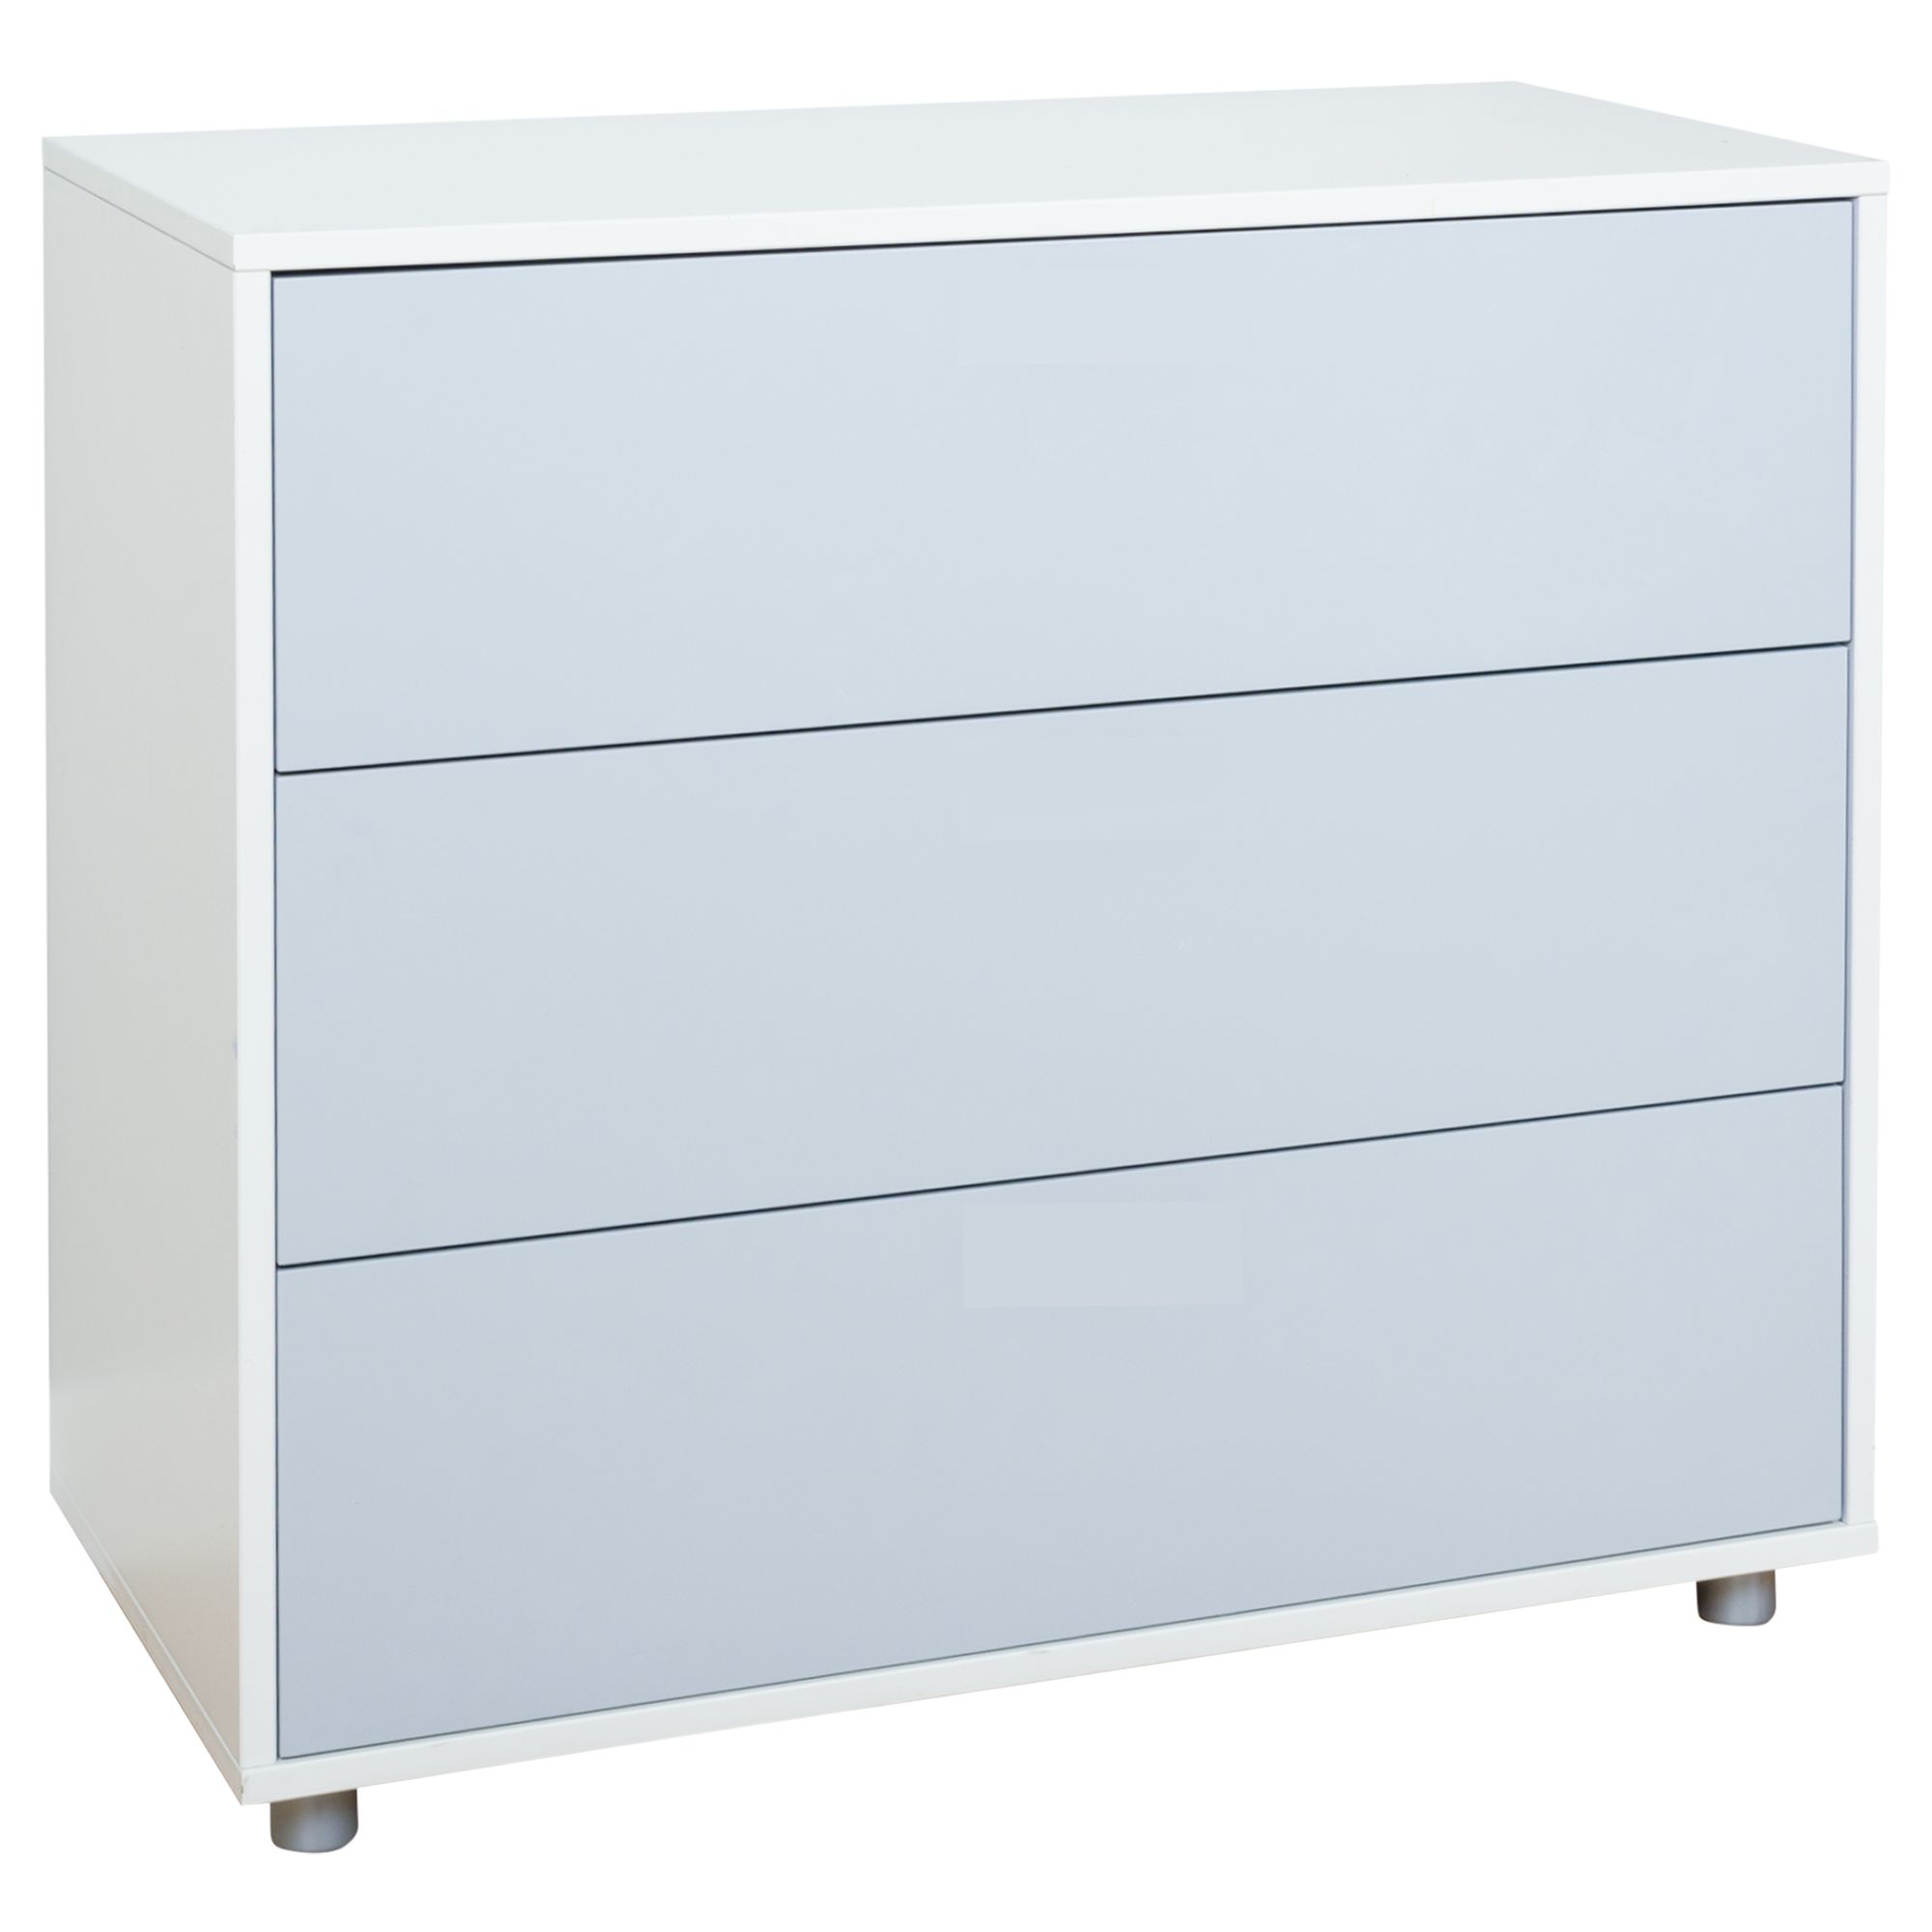 Stompa Uno S Plus 3 Drawer Chest At John Lewis Partners